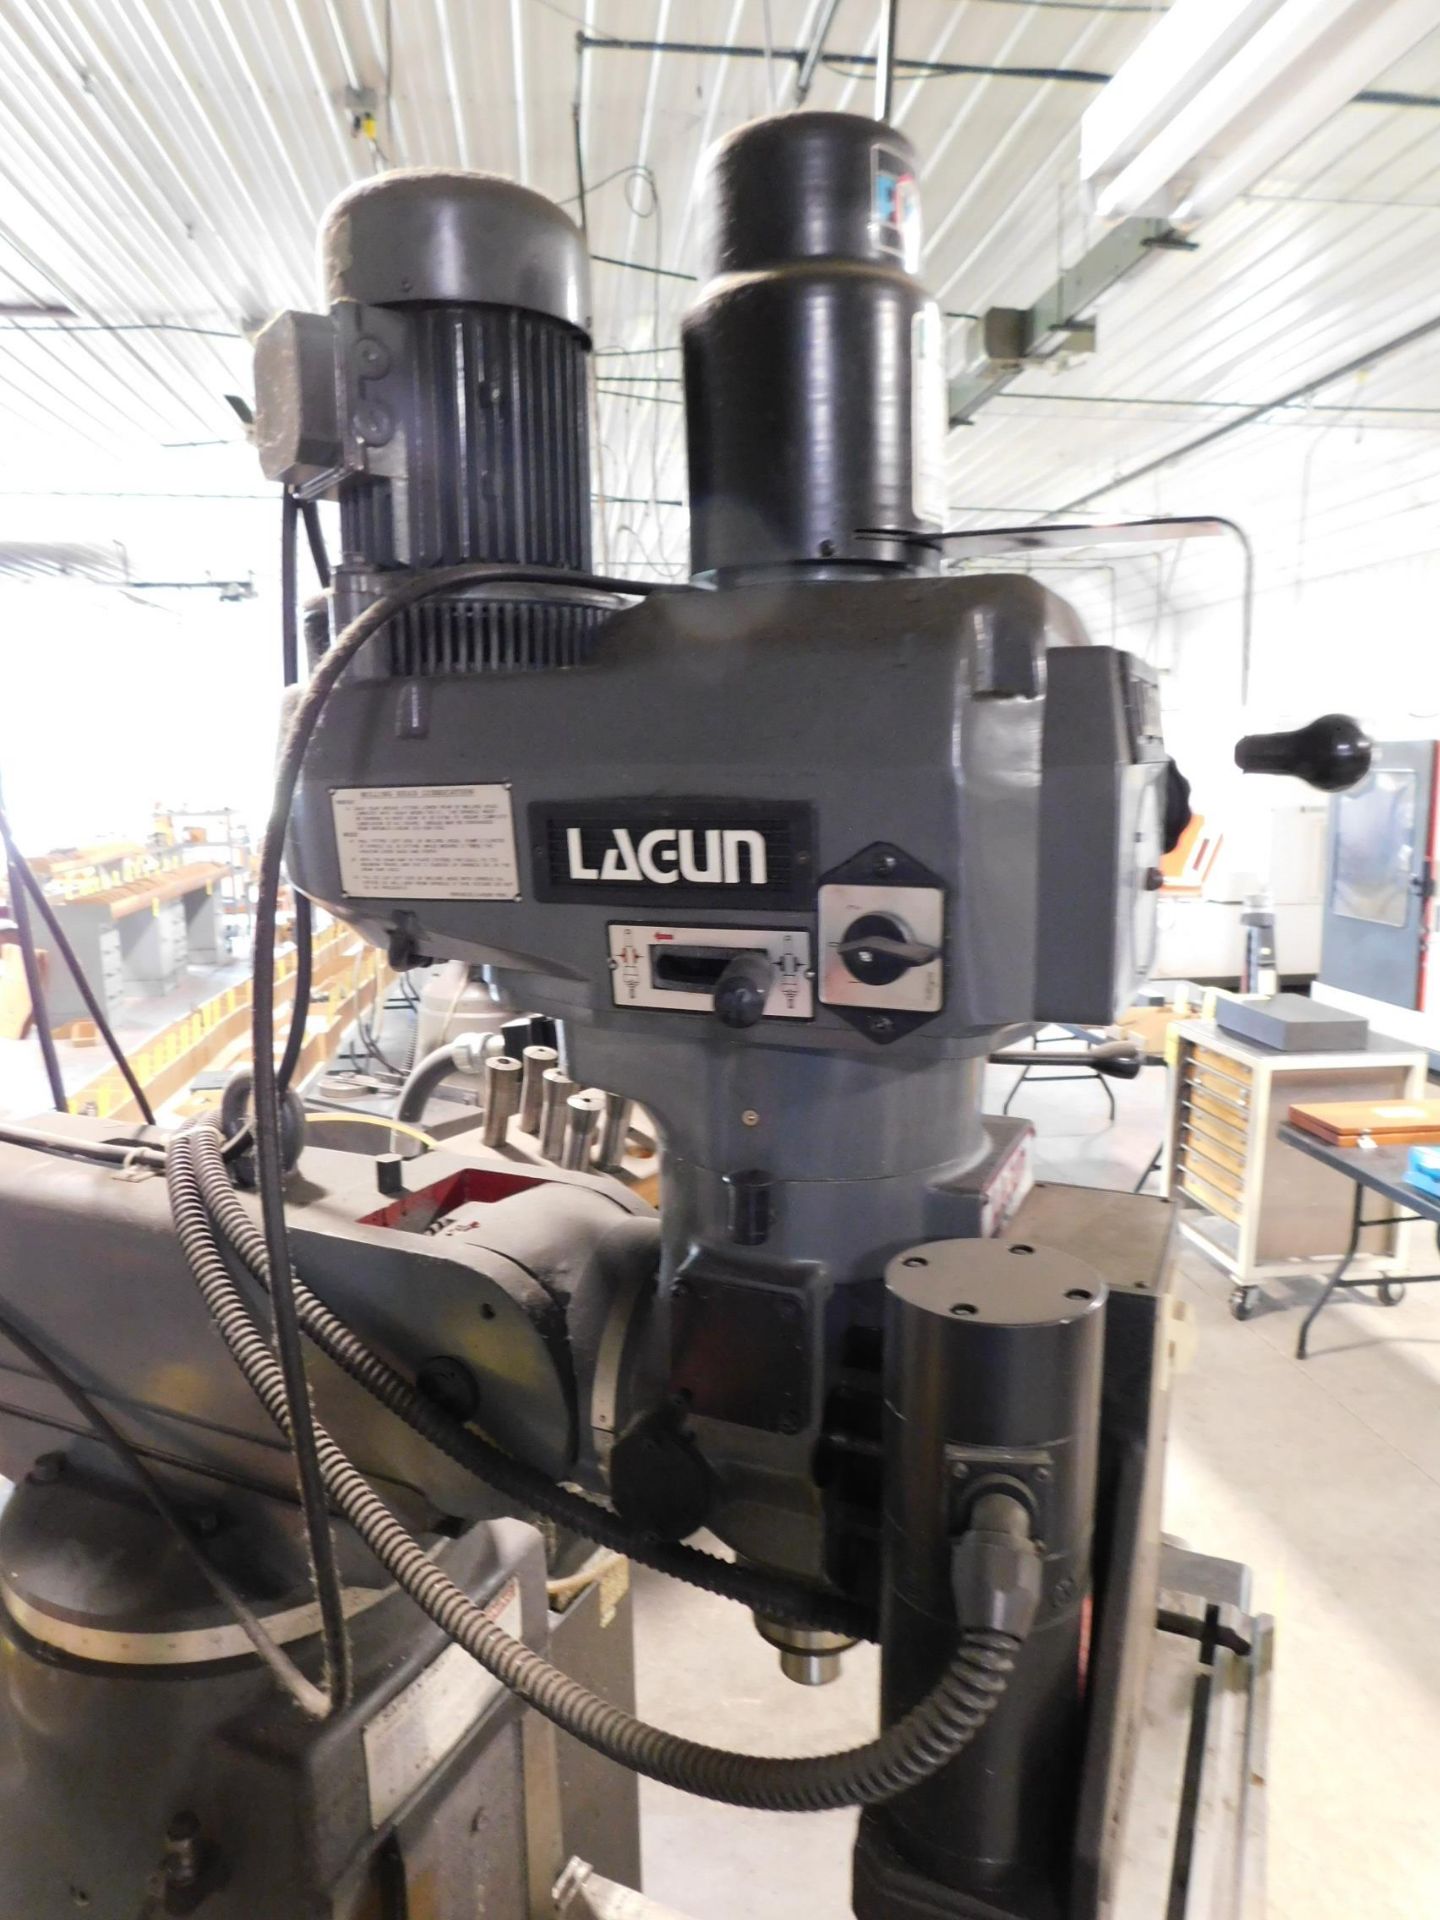 Lagun Model FTV-2 3-Axis CNC Vertical Mill SNSE-39360, w/Amilam 3300MK Control, 10"X50" Table, R-8 - Image 7 of 12